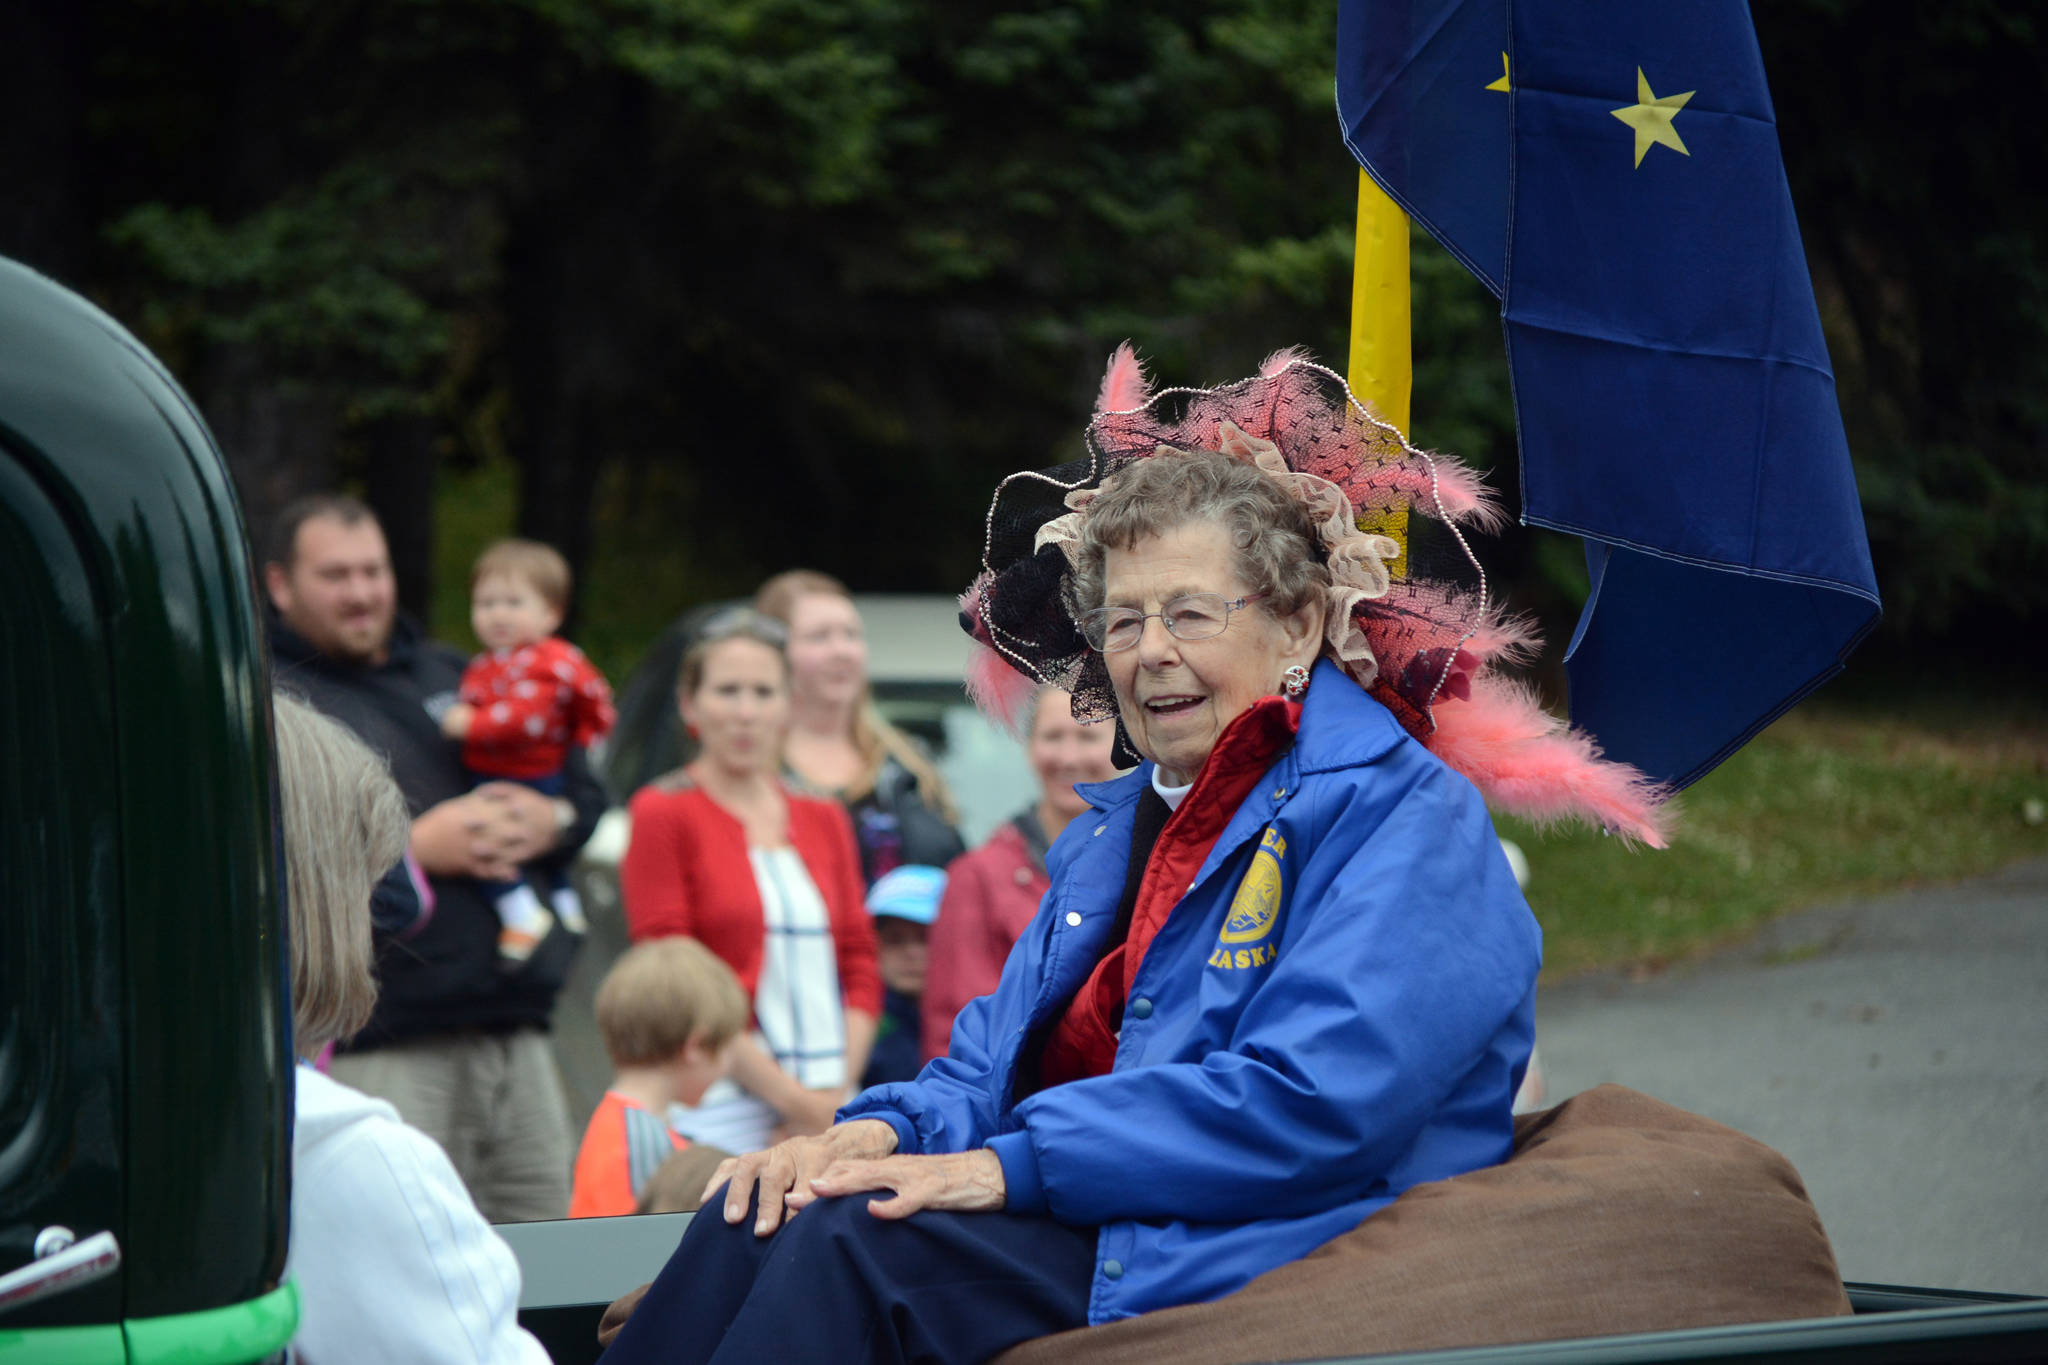 Tepa Rogers was honored in the 2015 Fourth of July parade as the resident who has lived in Homer the longest. (Photo by Michael Armstrong, Homer News)